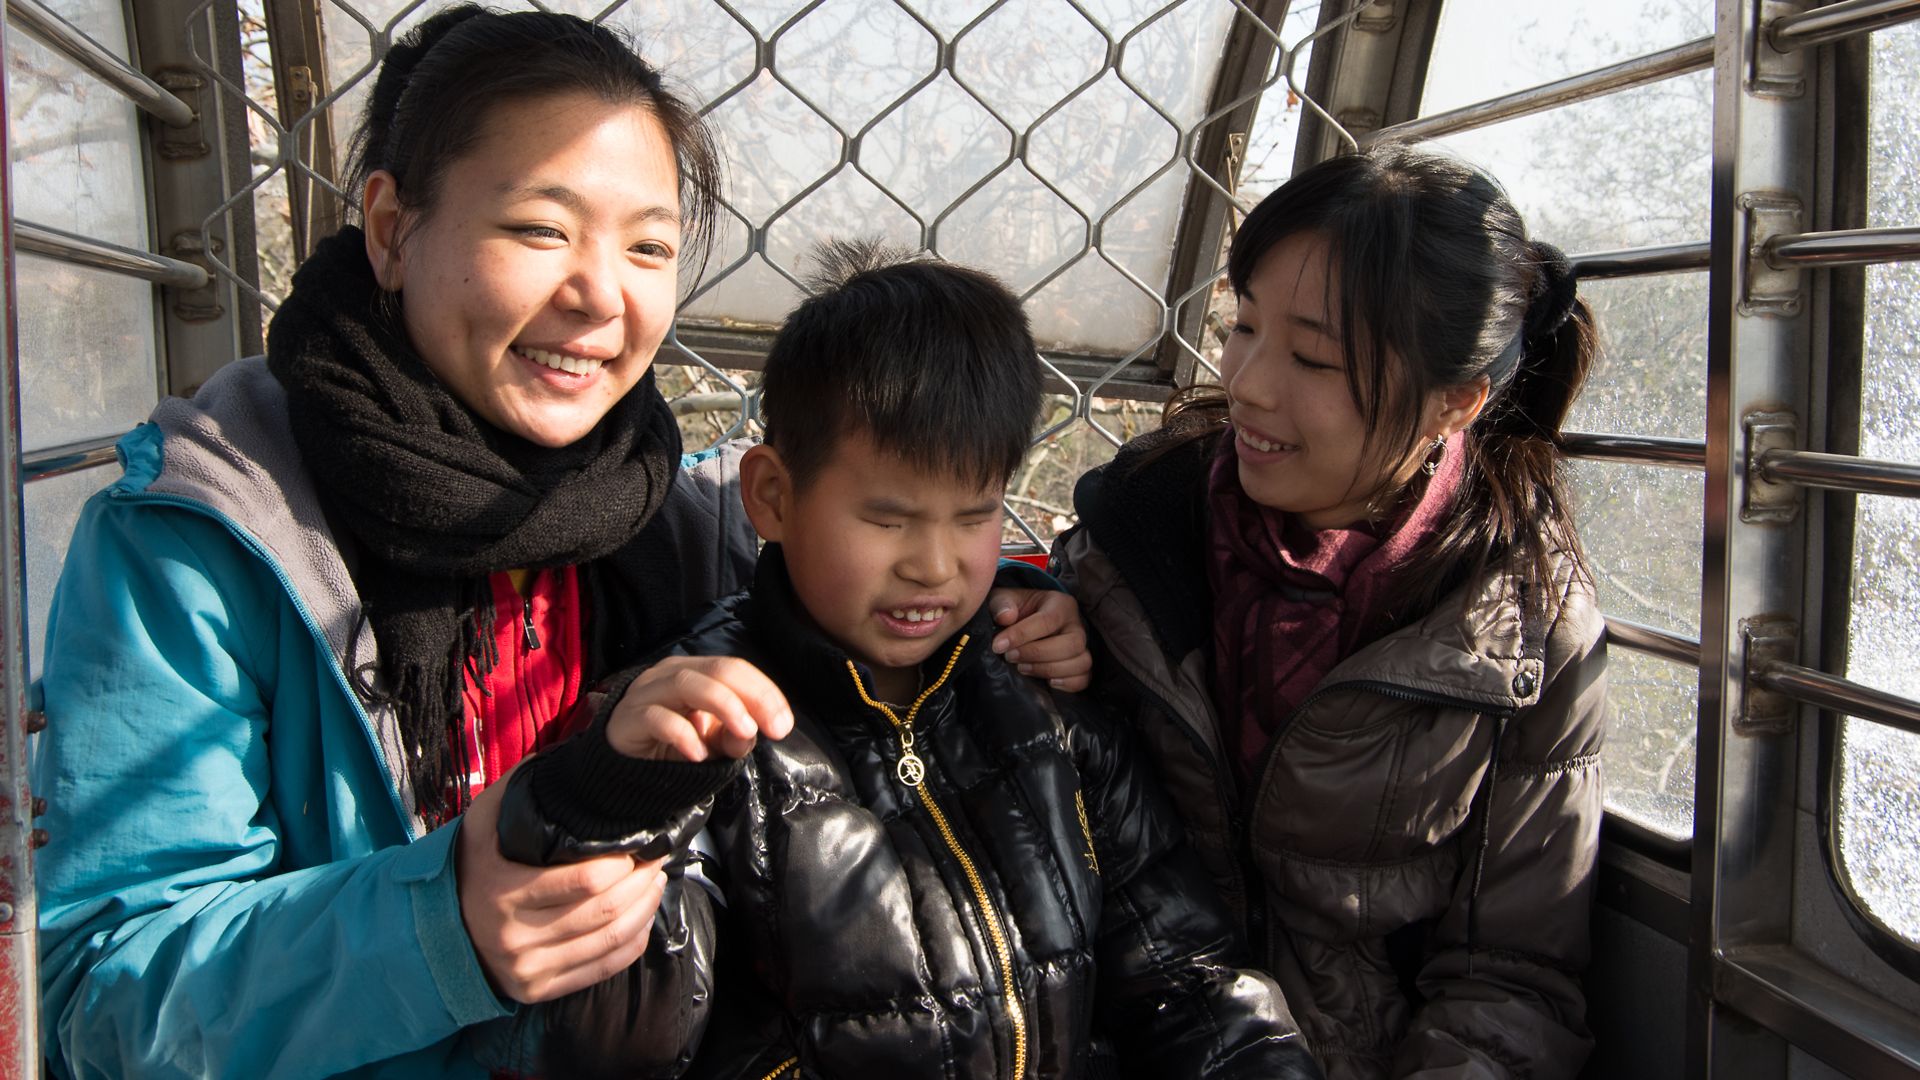 China: Grateful Green is a long-term MIT program that aims to help people in need and brighten up their lives.